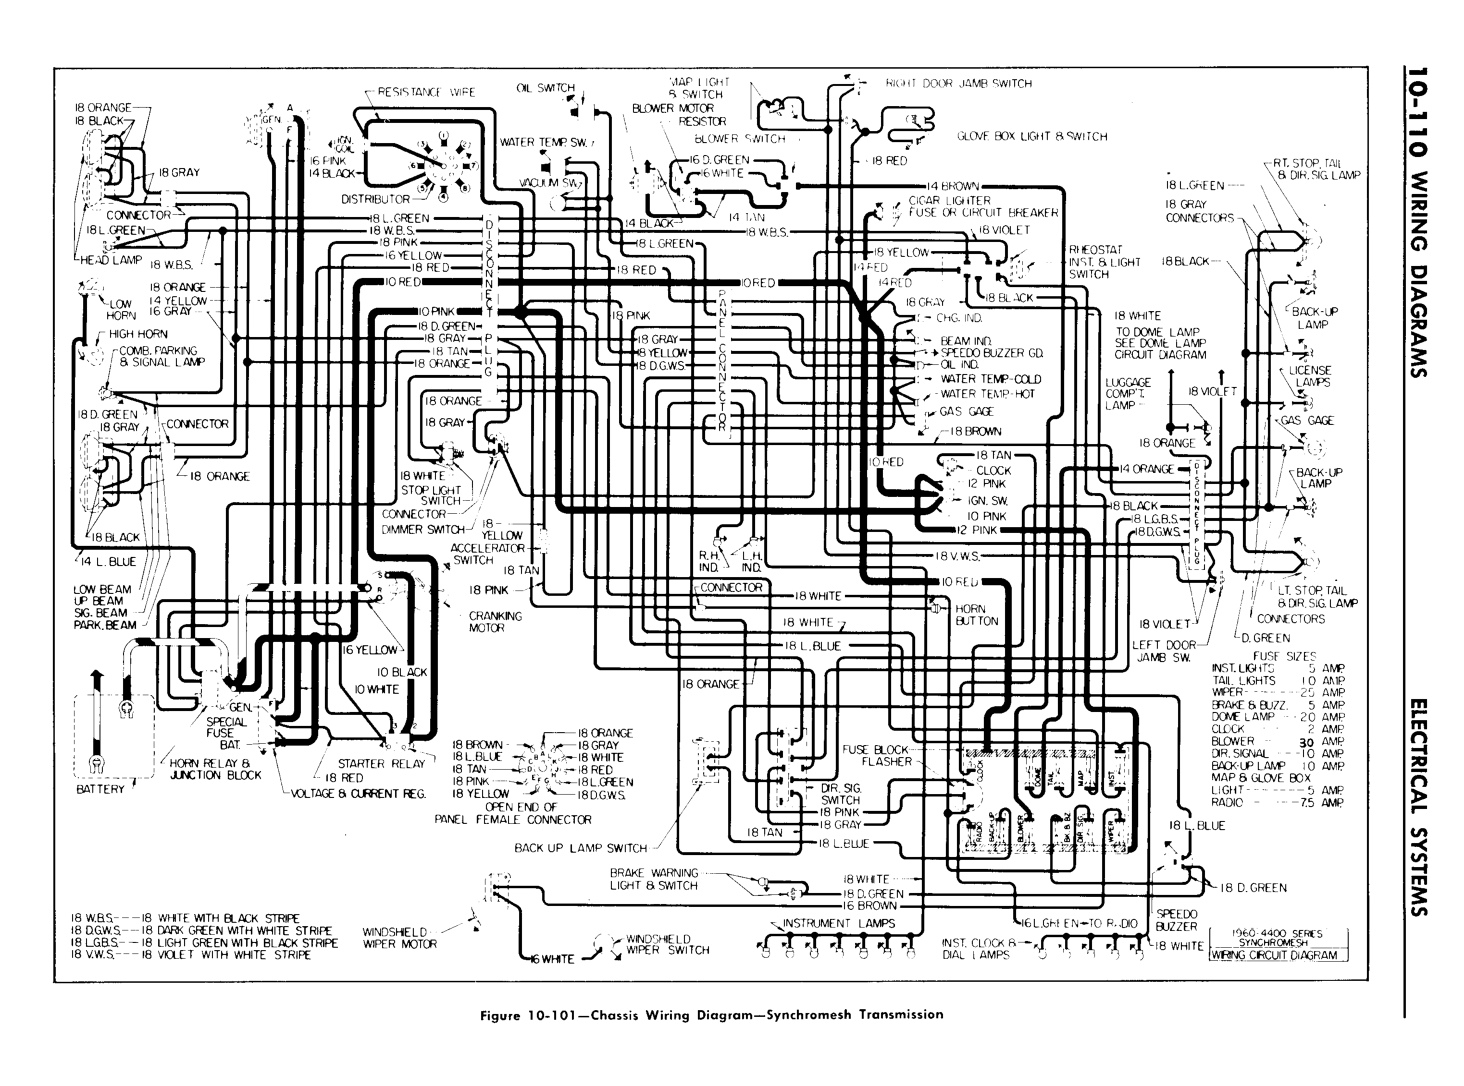 n_11 1960 Buick Shop Manual - Electrical Systems-110-110.jpg